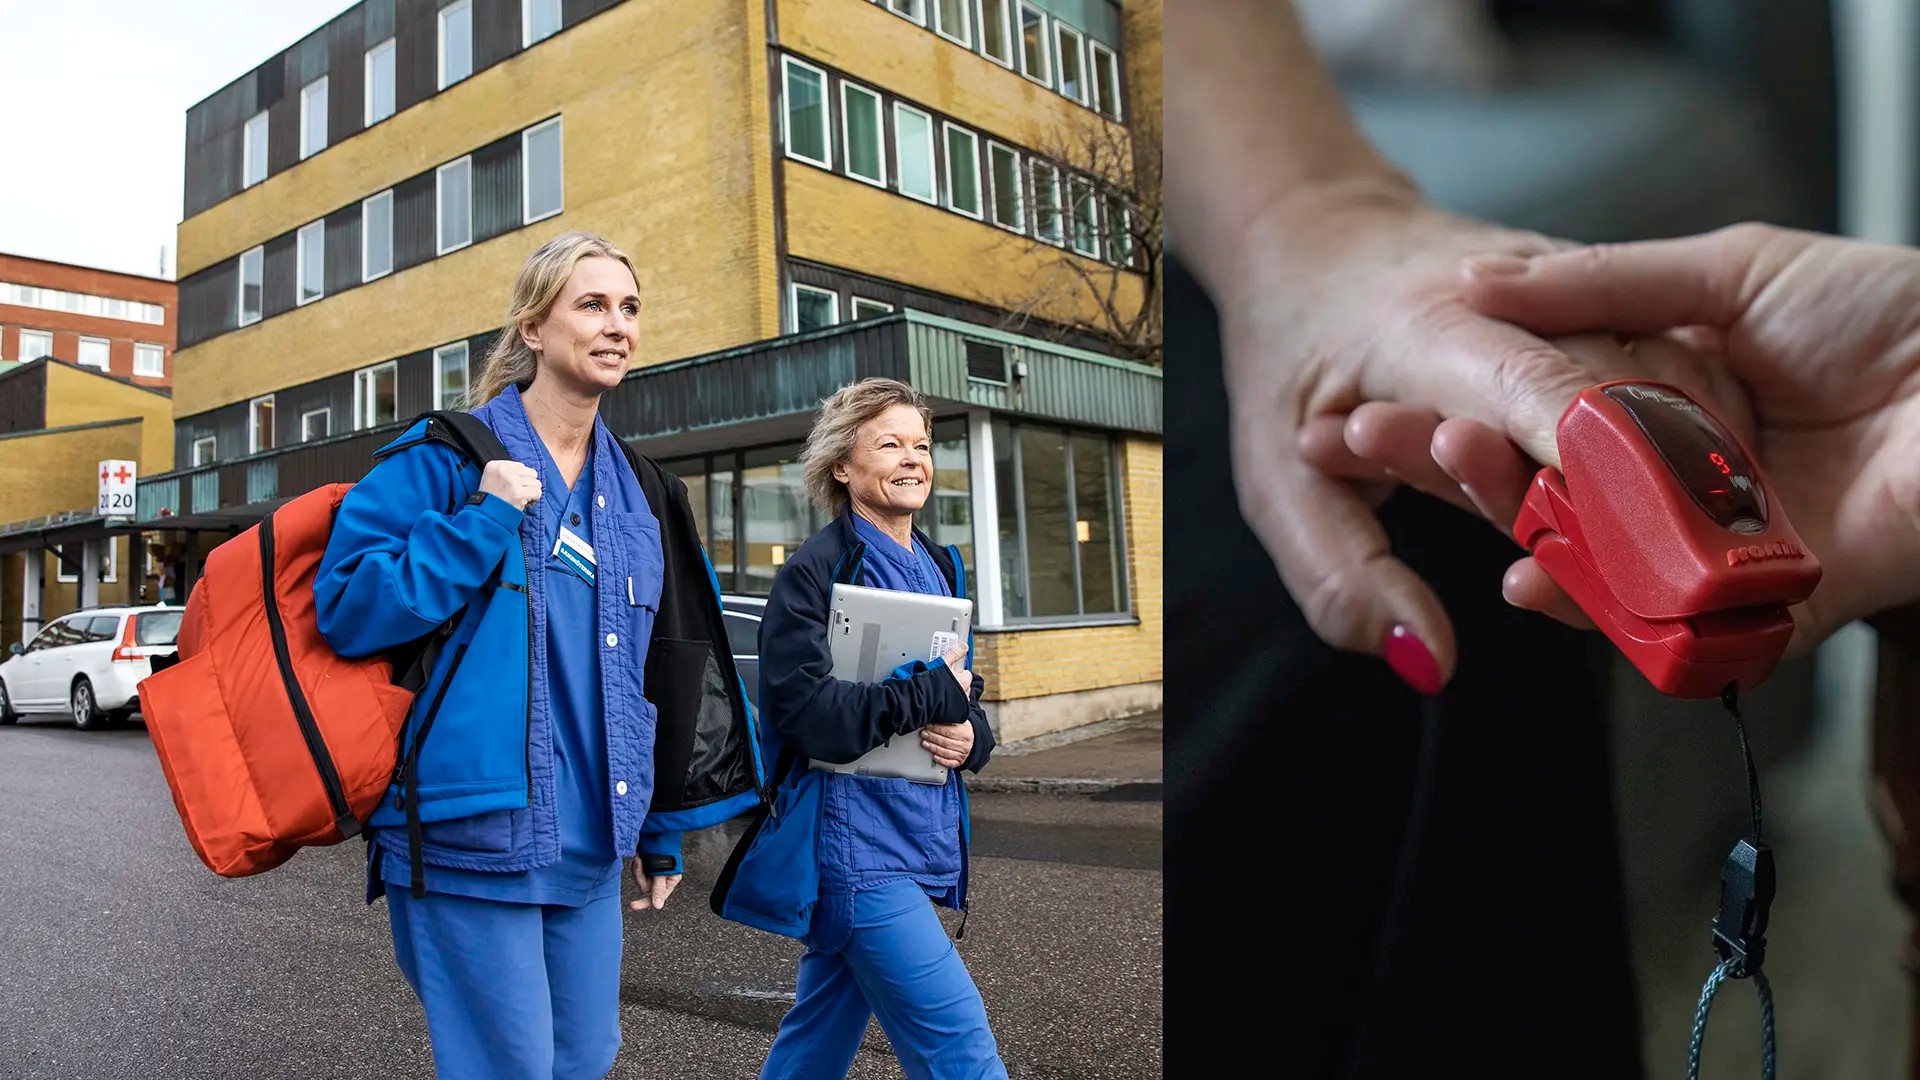 Montage of hospital staff on their way to a patient and a heart rate monitor on a hand.